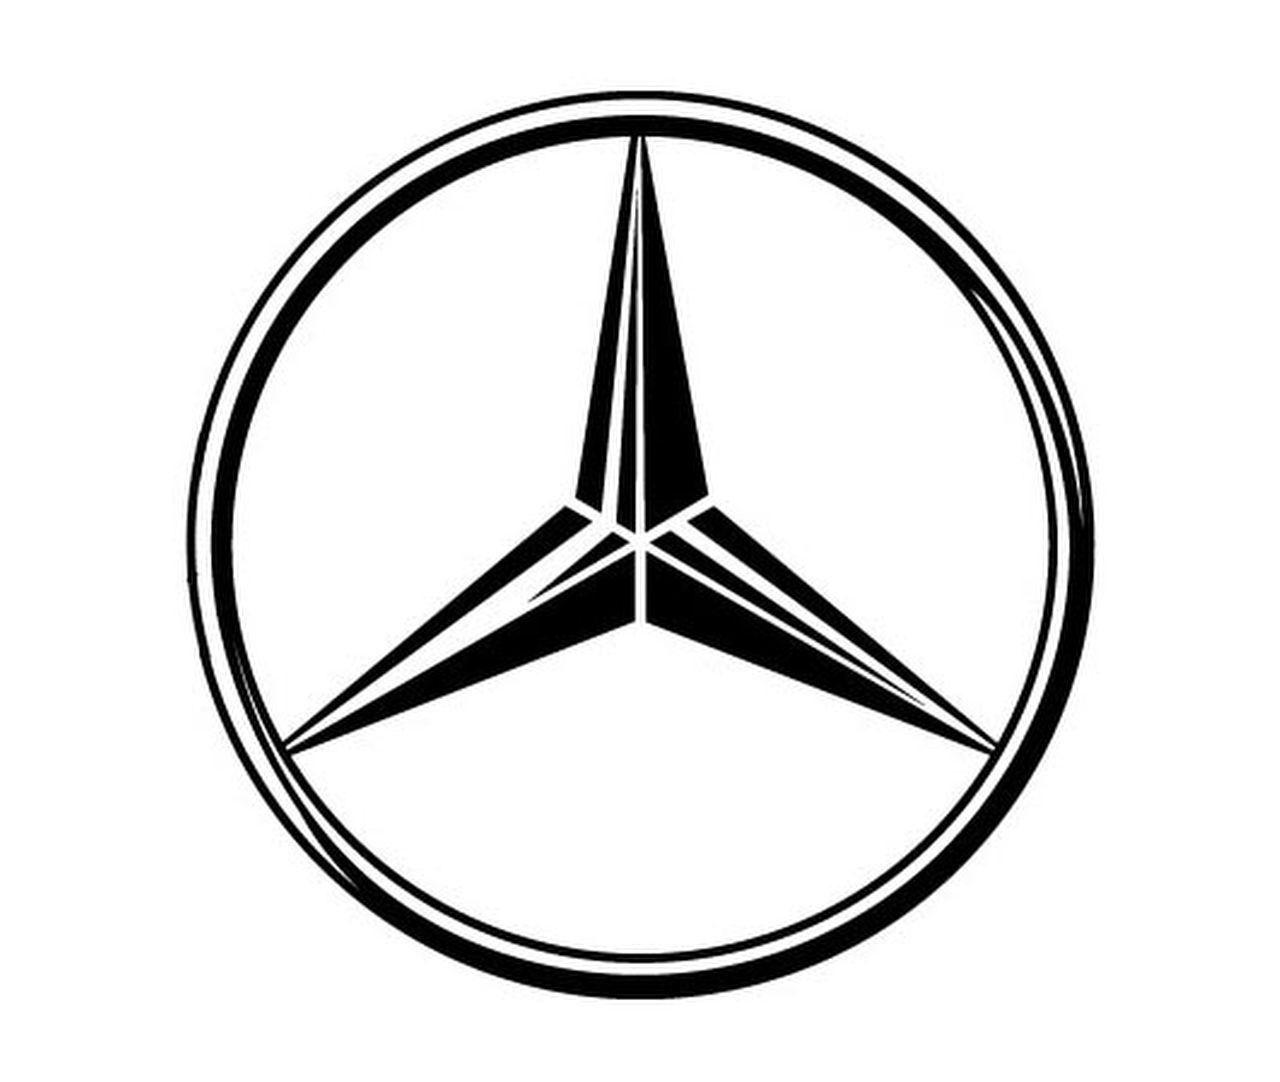 Triangle in Circle Company Logo - Mercedes Logo, Mercedes-Benz Car Symbol Meaning and History | Car ...